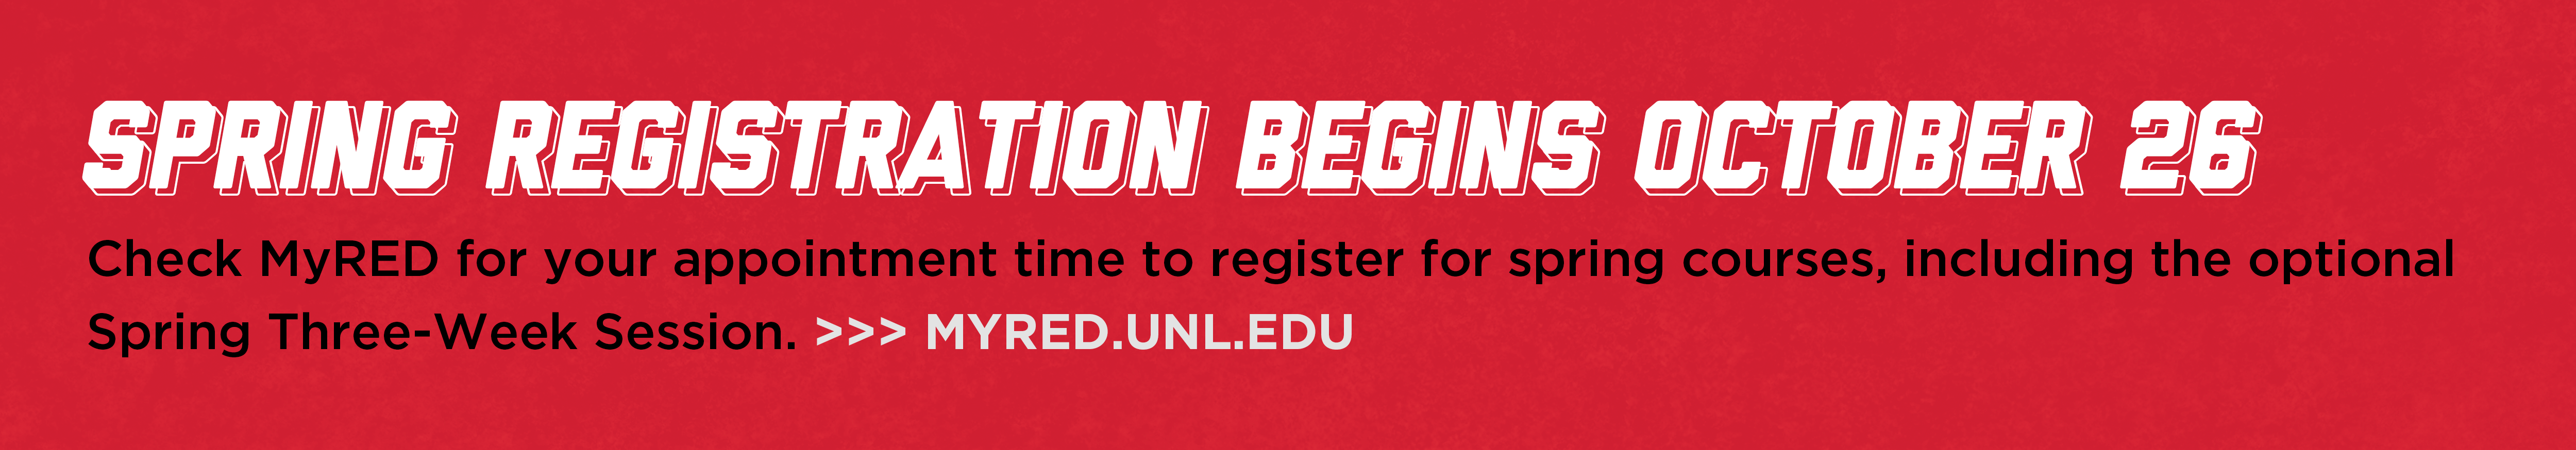 Spring Registration begins October 26. Check MyRed for your appointment time to register for spring courses, including the optional Spring Three-Week Session.